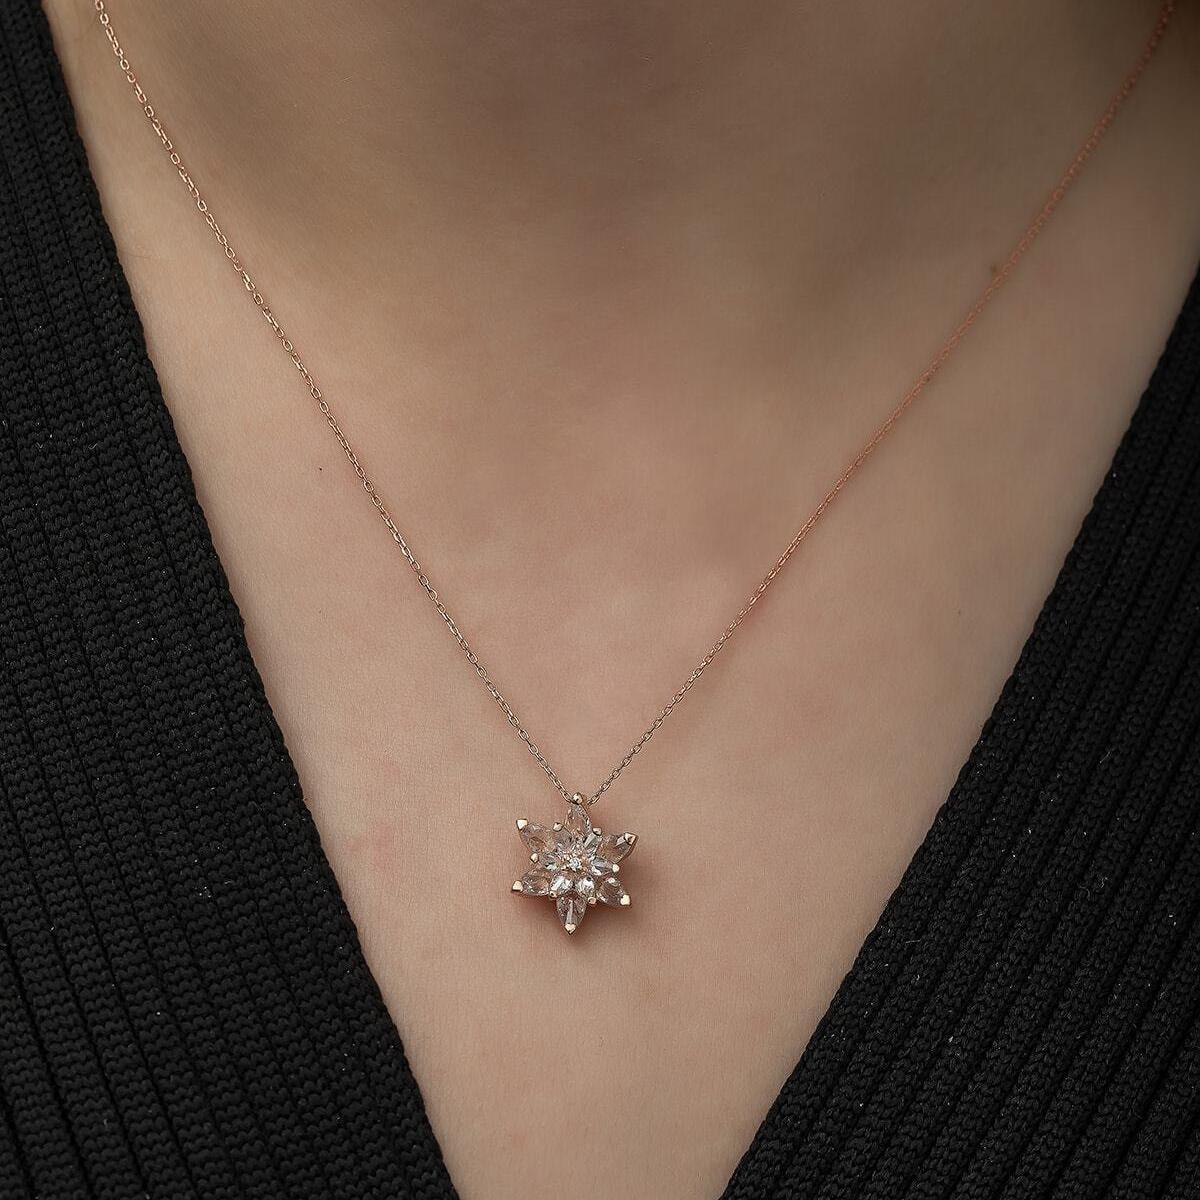 Lotus Flower Necklace • Diamond Lotus Necklace • Lotus Necklace Silver - Trending Silver Gifts